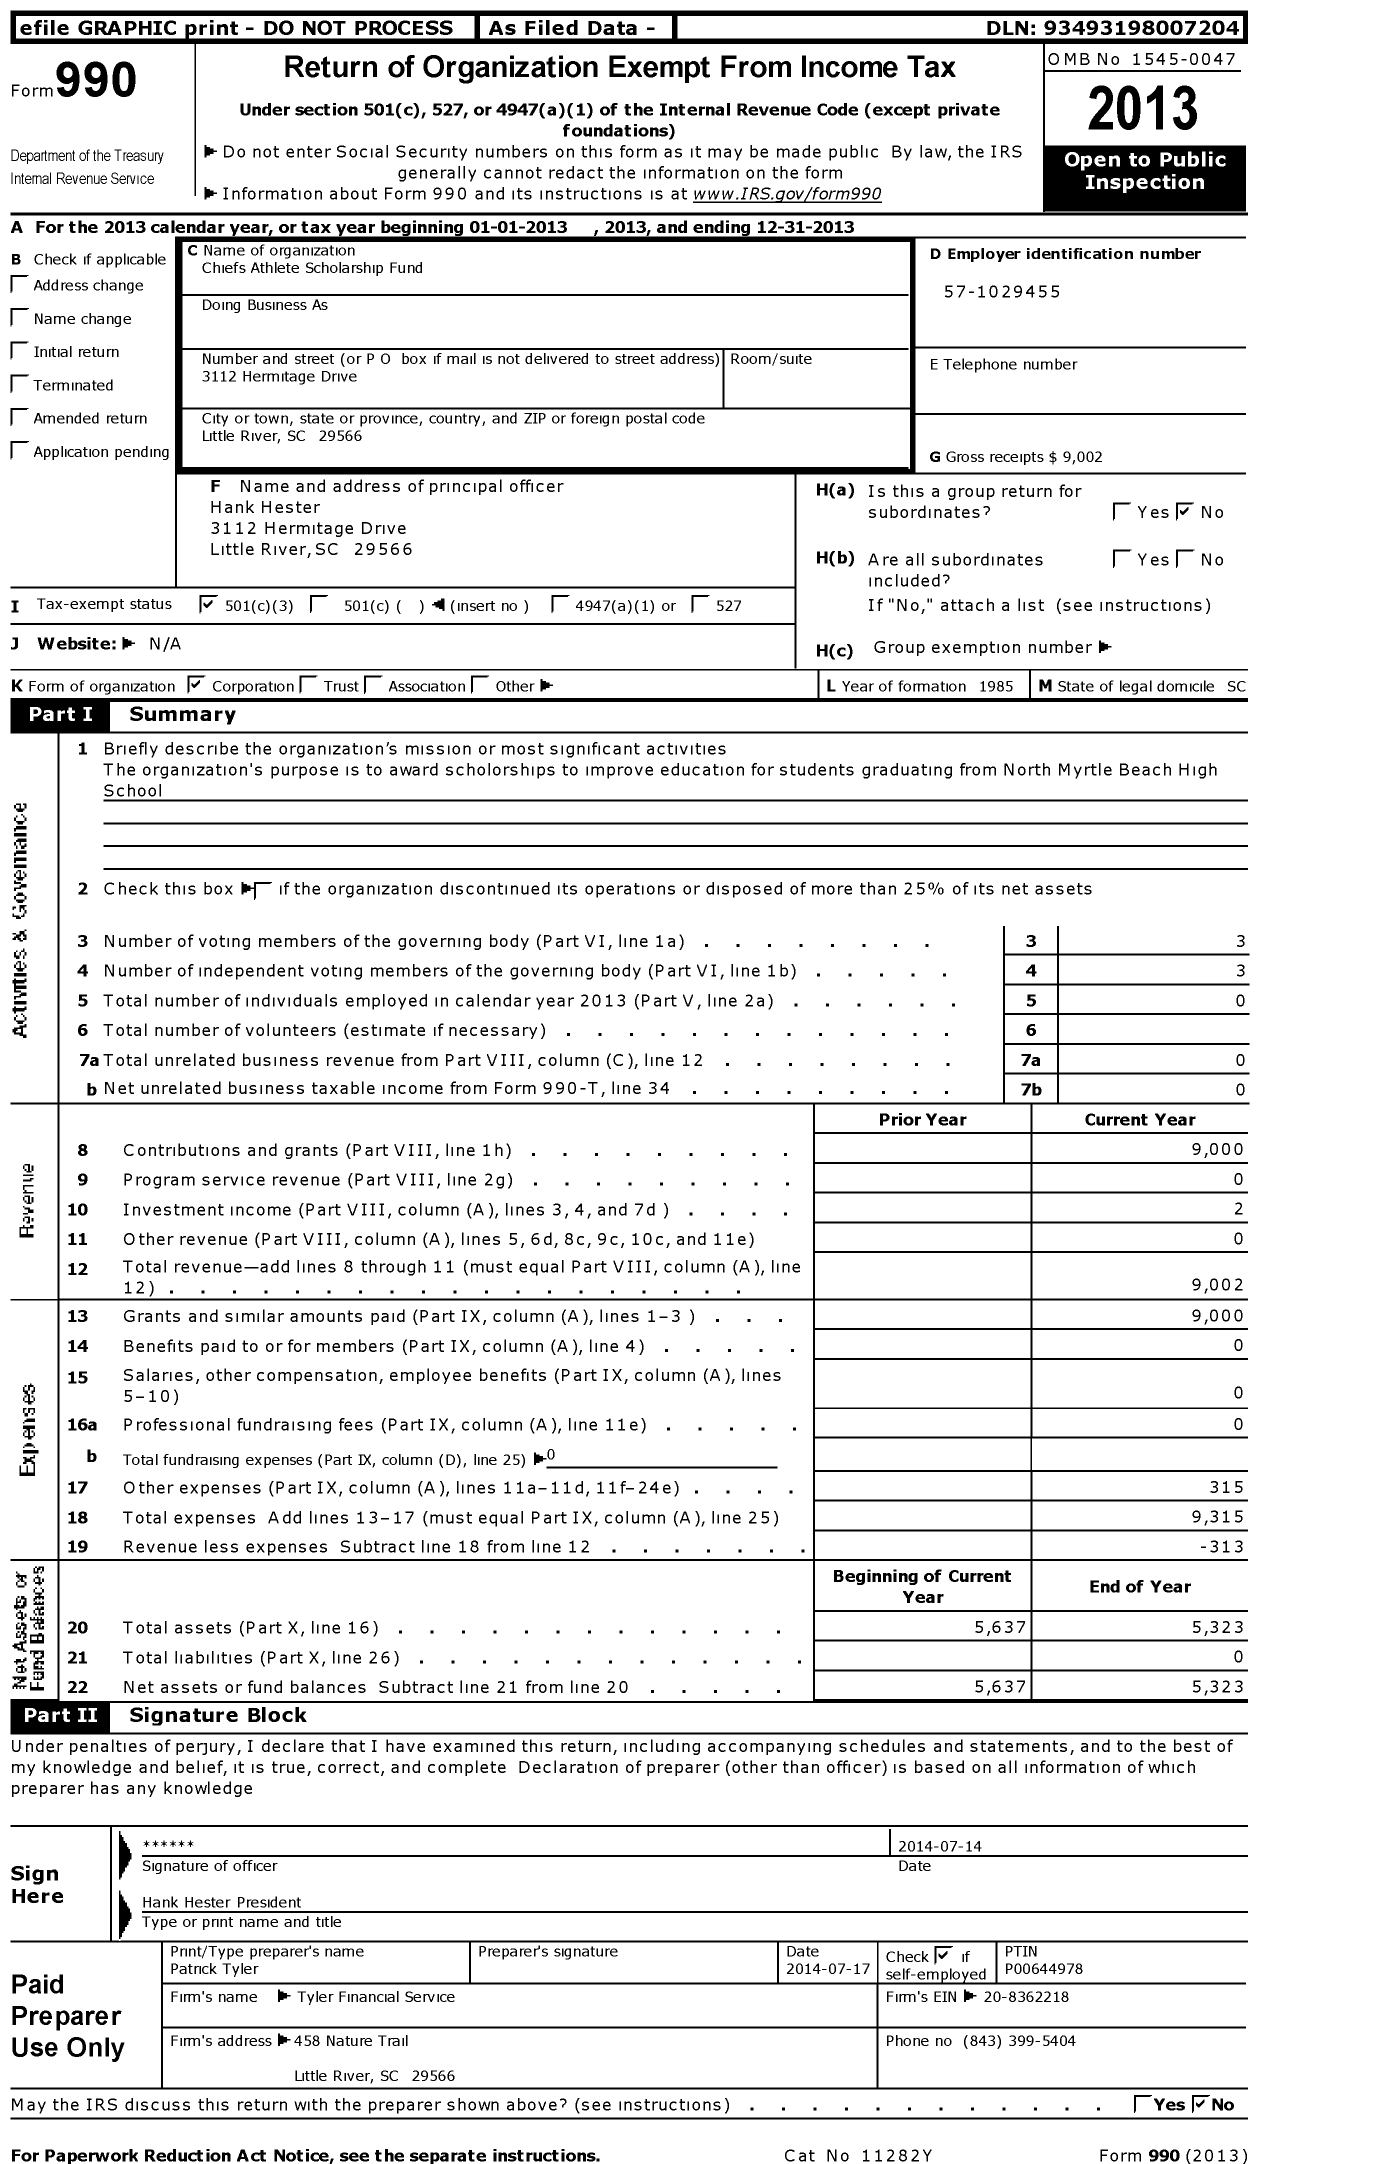 Image of first page of 2013 Form 990 for Chiefs Athletic Scholarship Fund in